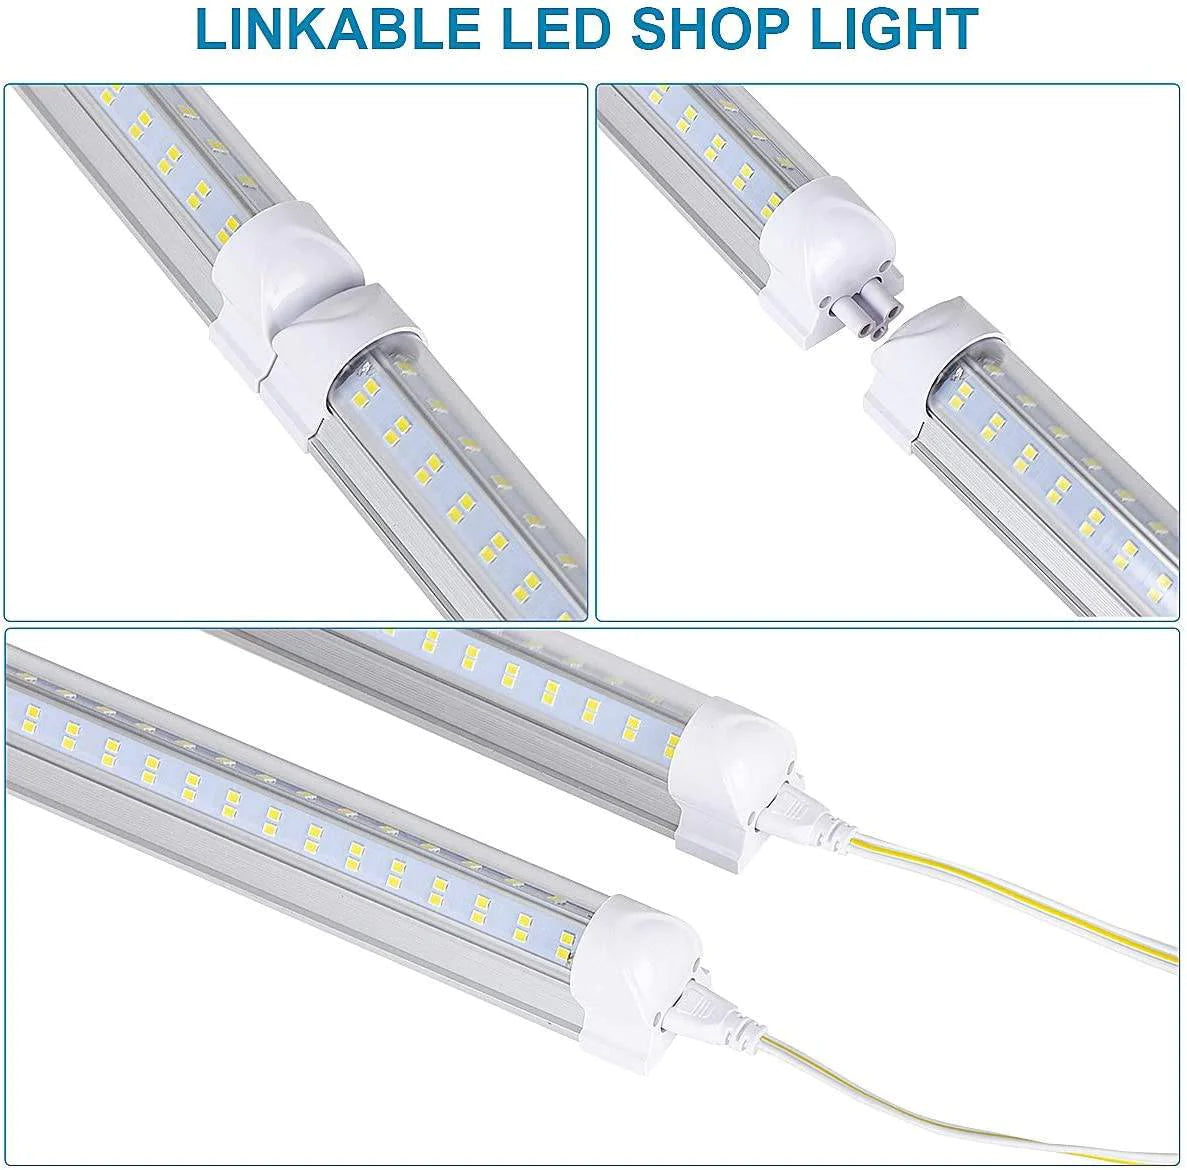 4ft- LED T8 Integrated Tube Light- 30 Watt, 5000K and 4660 Lumens and High Output Linkable, Plug and Play, ETL and DLC Listed Fixture- Eco LED Lightings